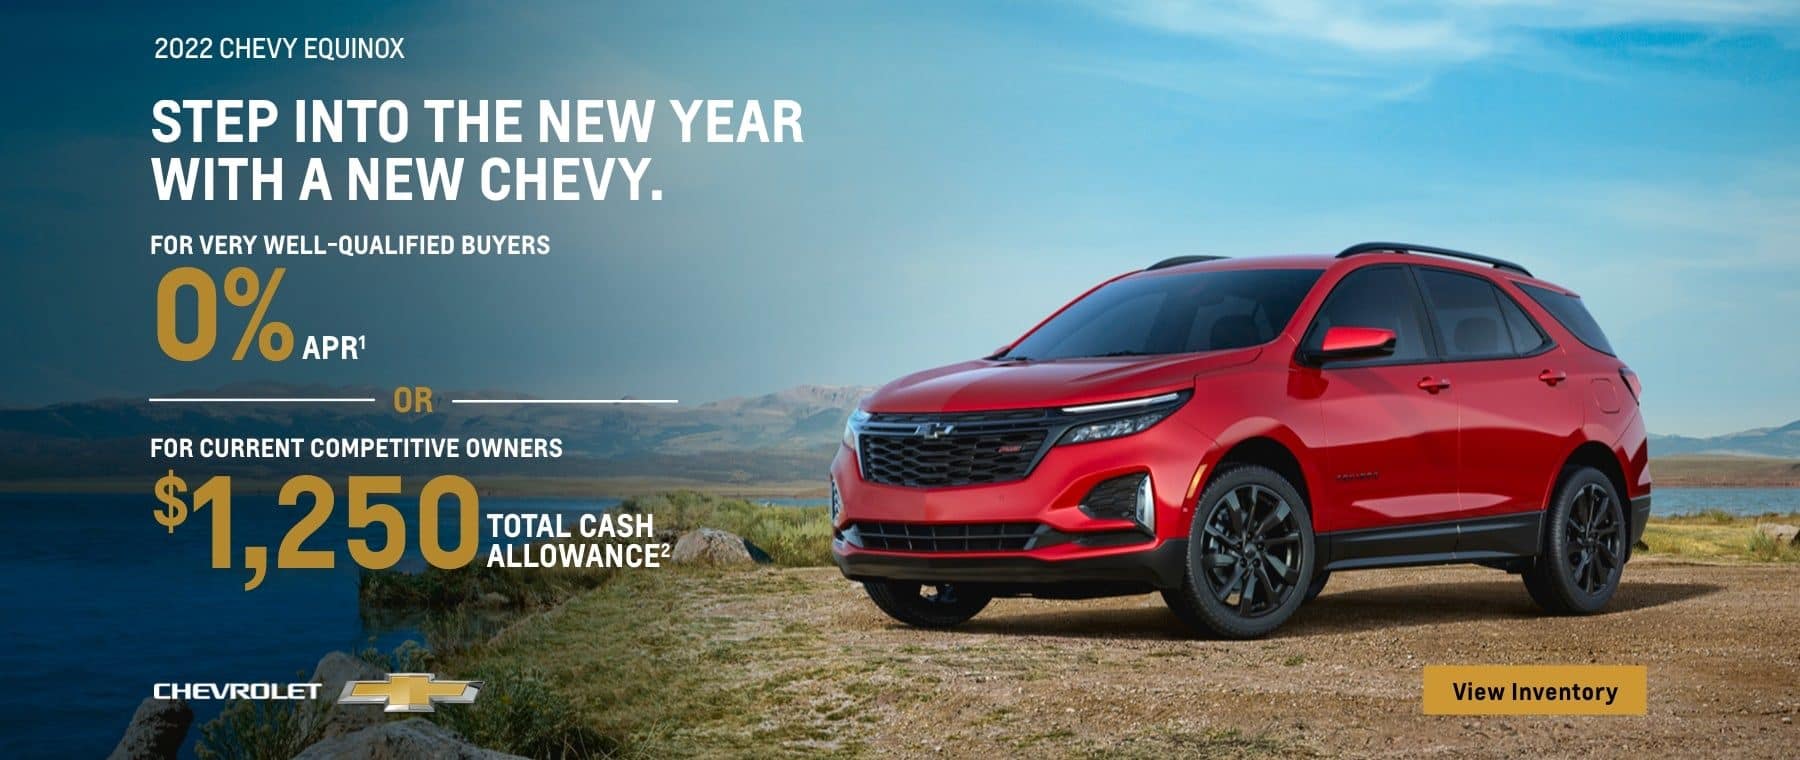 2022 Chevy Equinox. Step into the new year with a new Chevy. For very well-qualified buyers 0% APR. Or, for current competitive owners $1,250 total cash allowance.